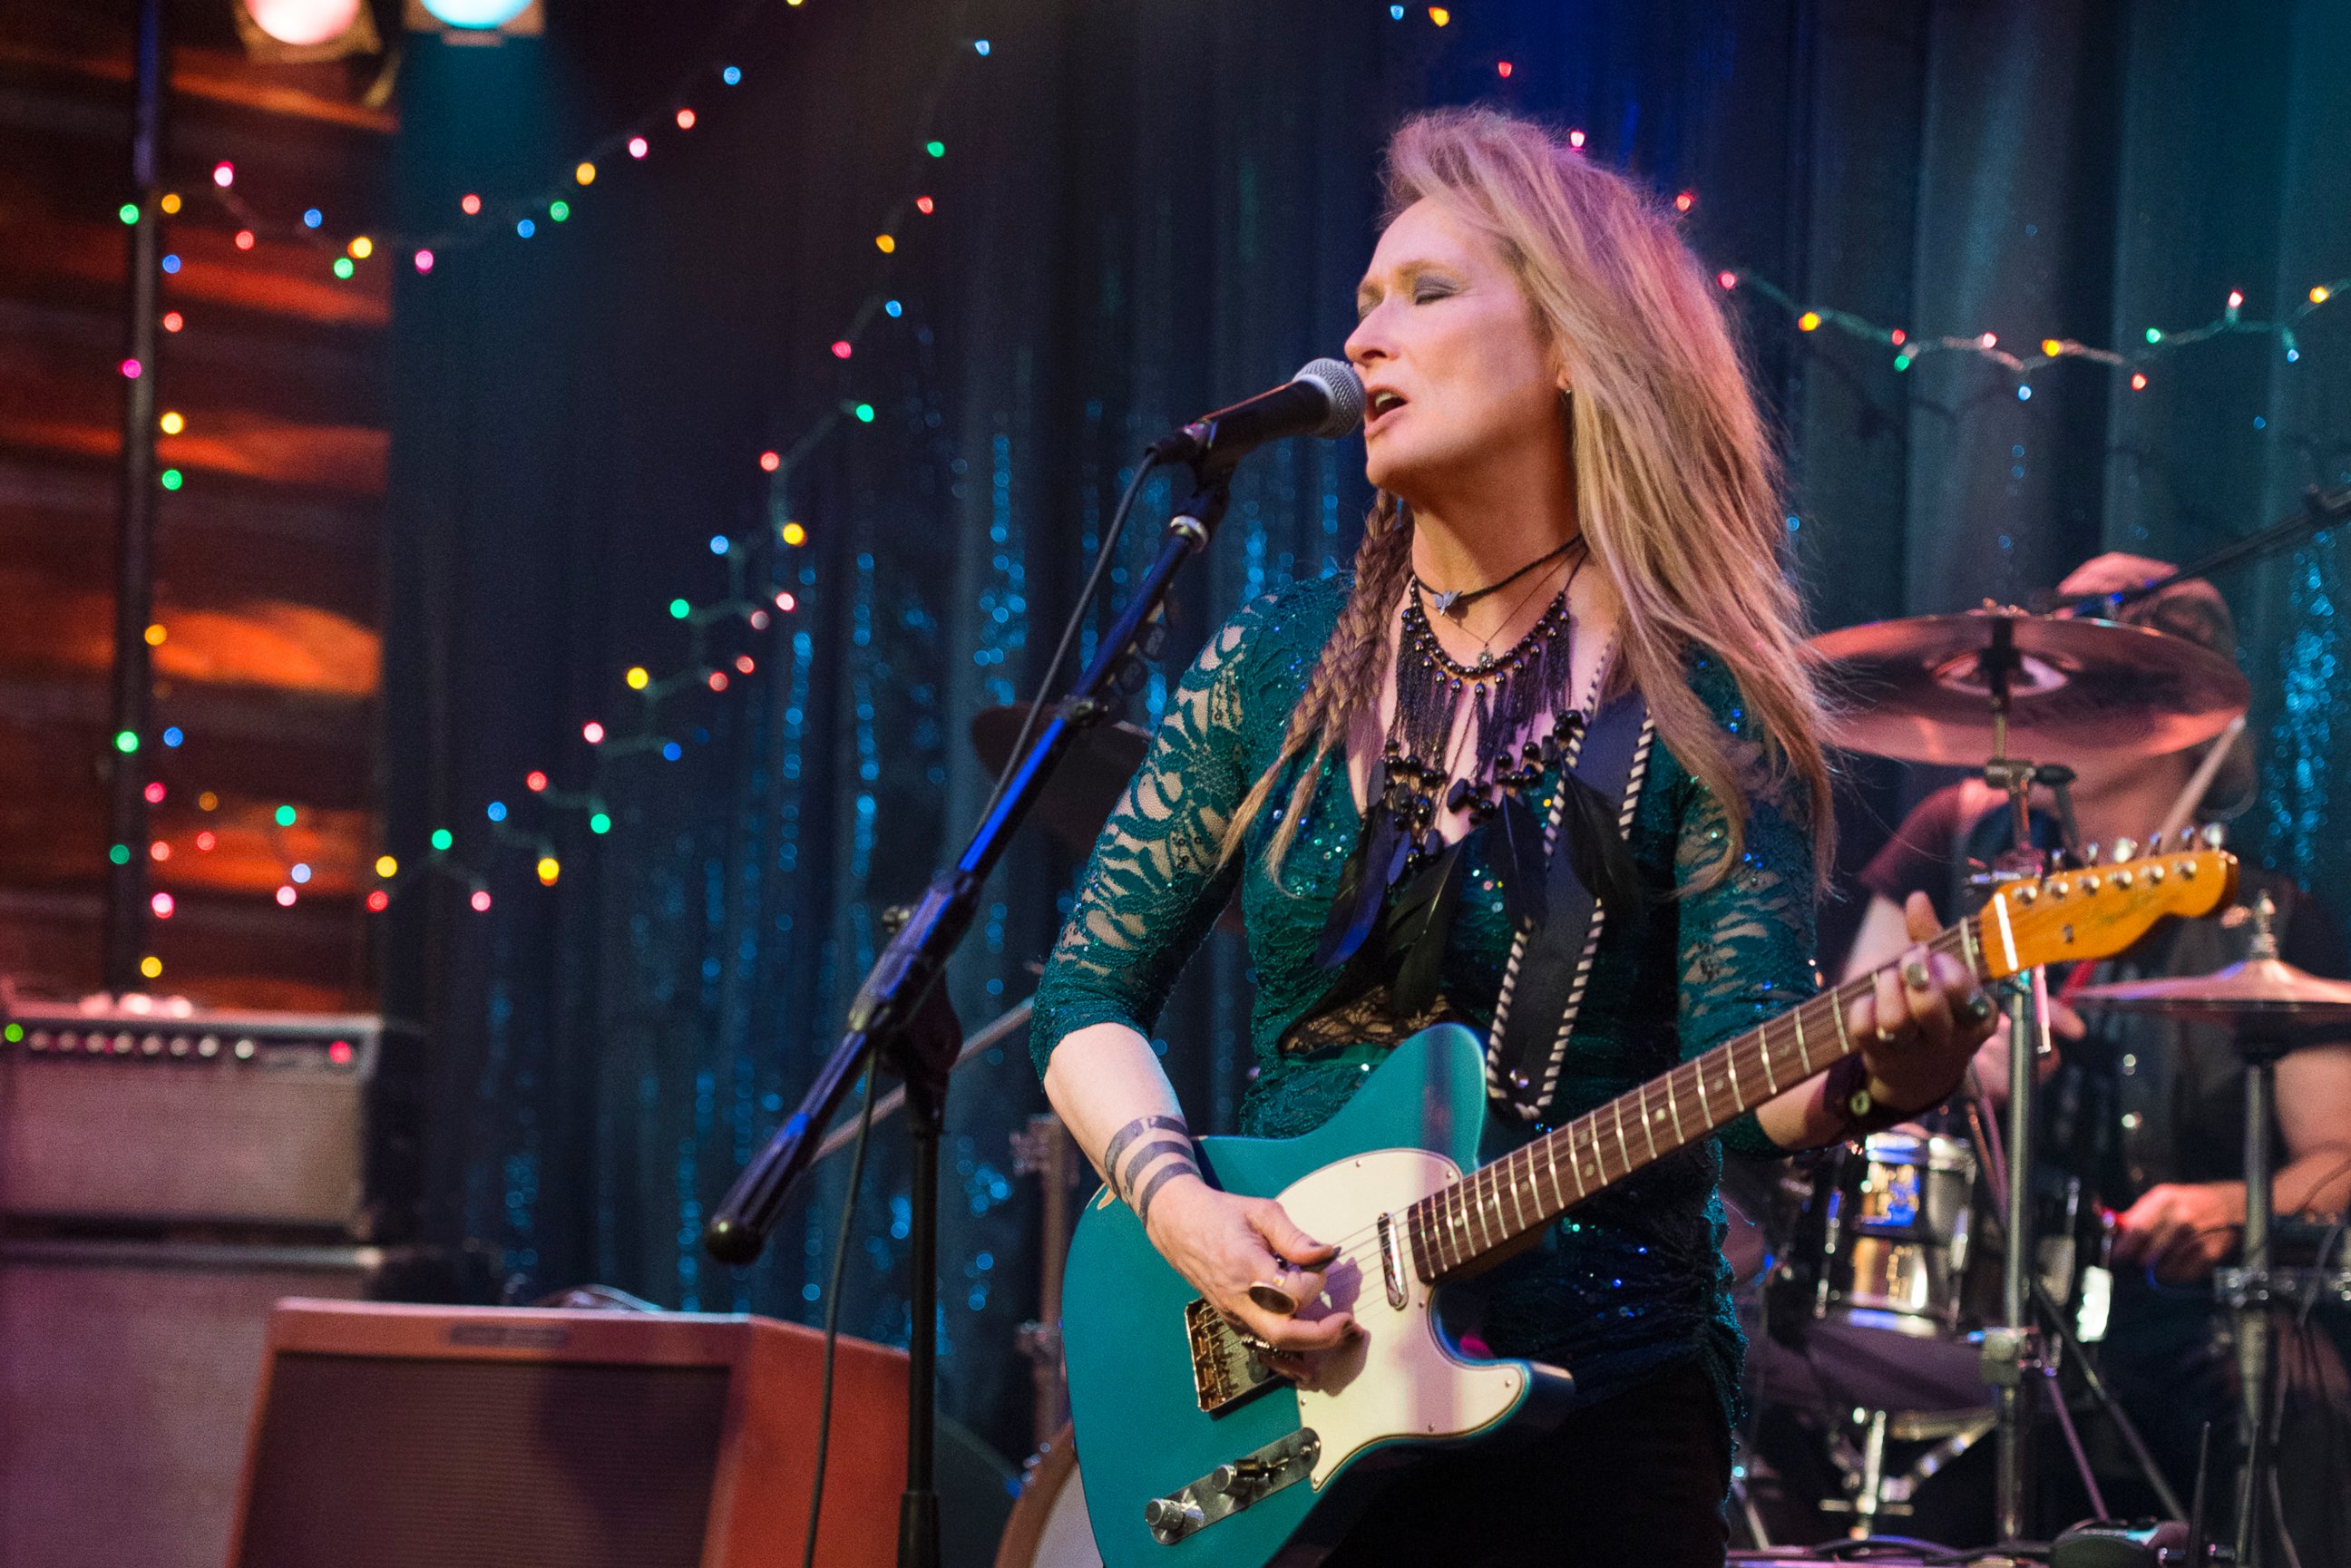 PHOTO: Meryl Streep performs at the Salt Well in "Ricki and the Flash." 